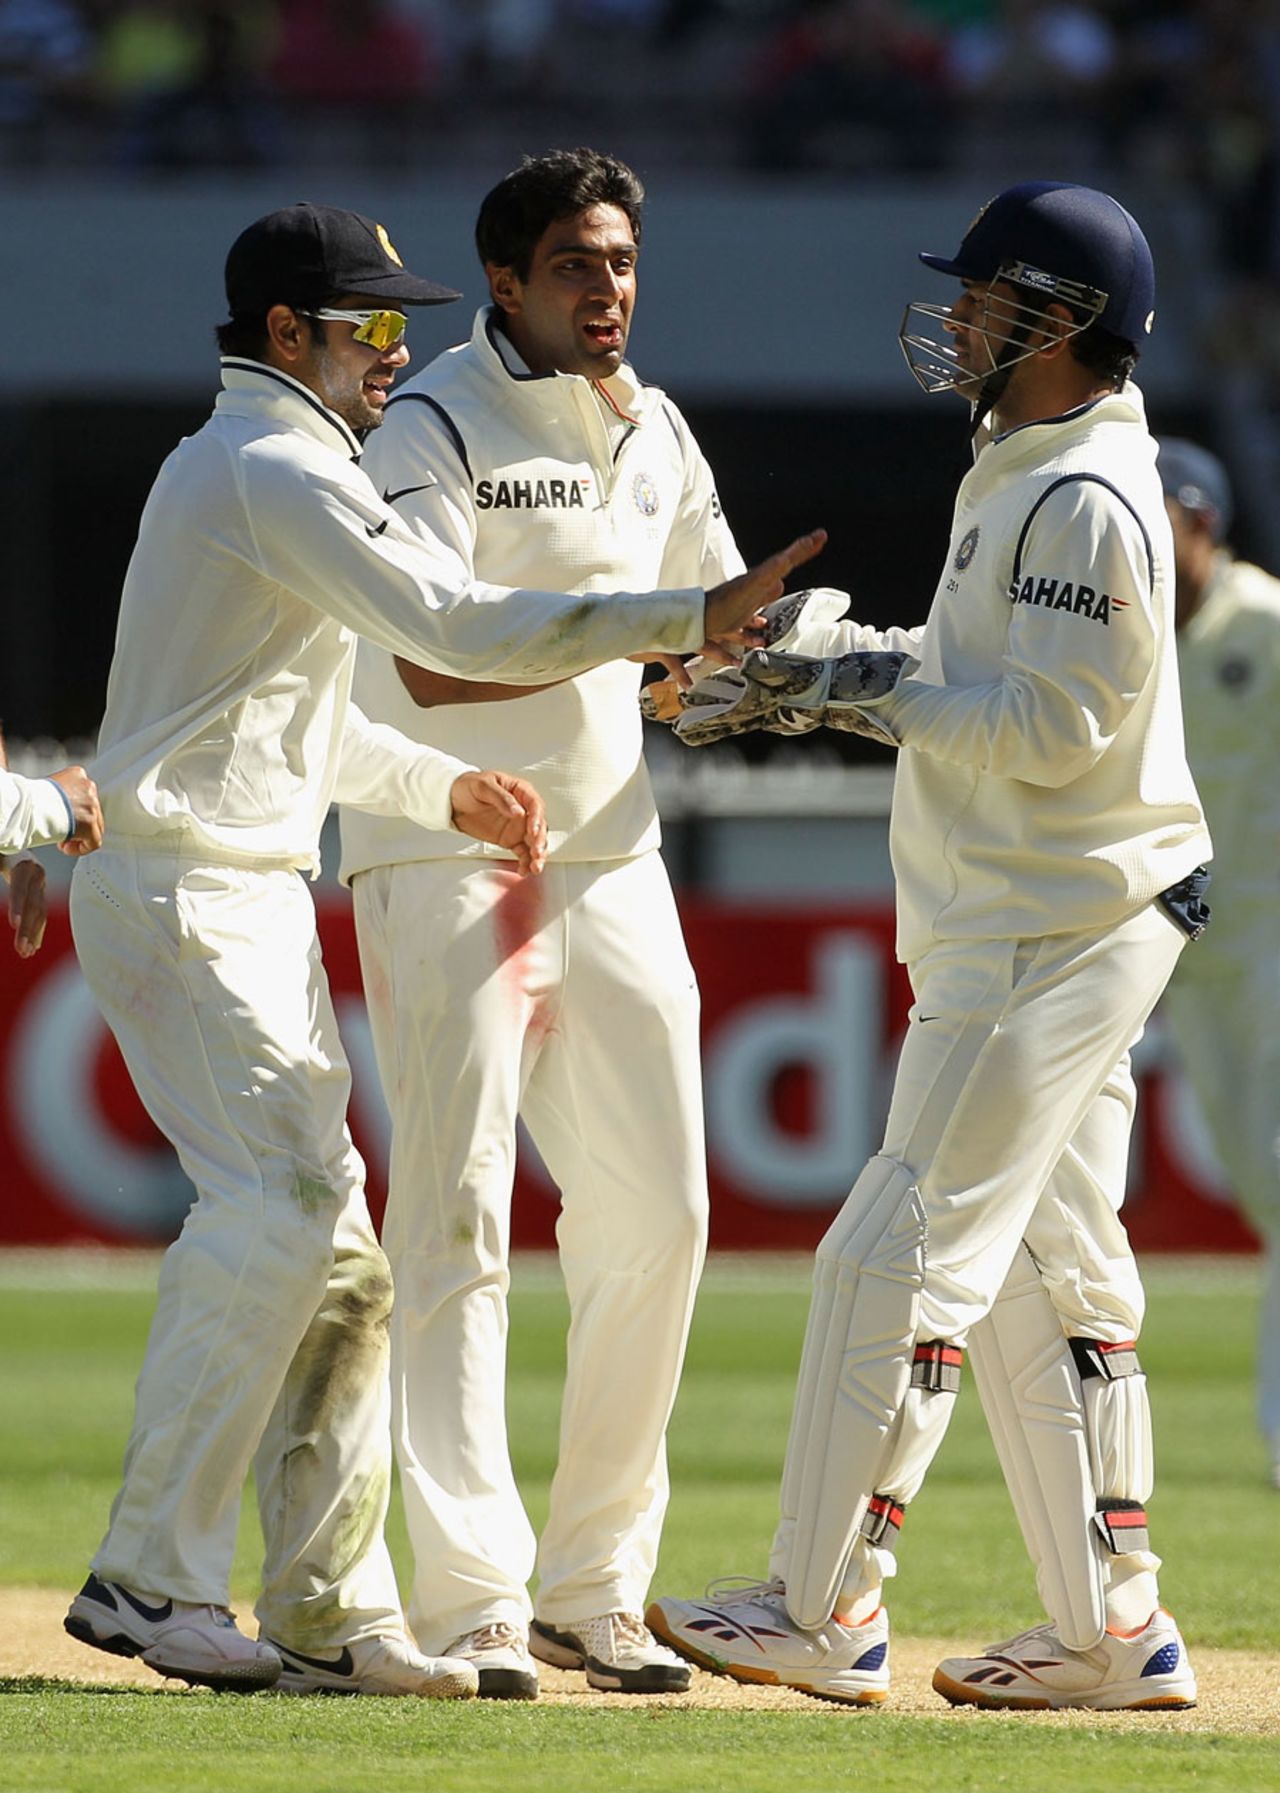 R Ashwin took the wicket of Ed Cowan, Australia v India, 1st Test, Melbourne, 1st day, December 26, 2011